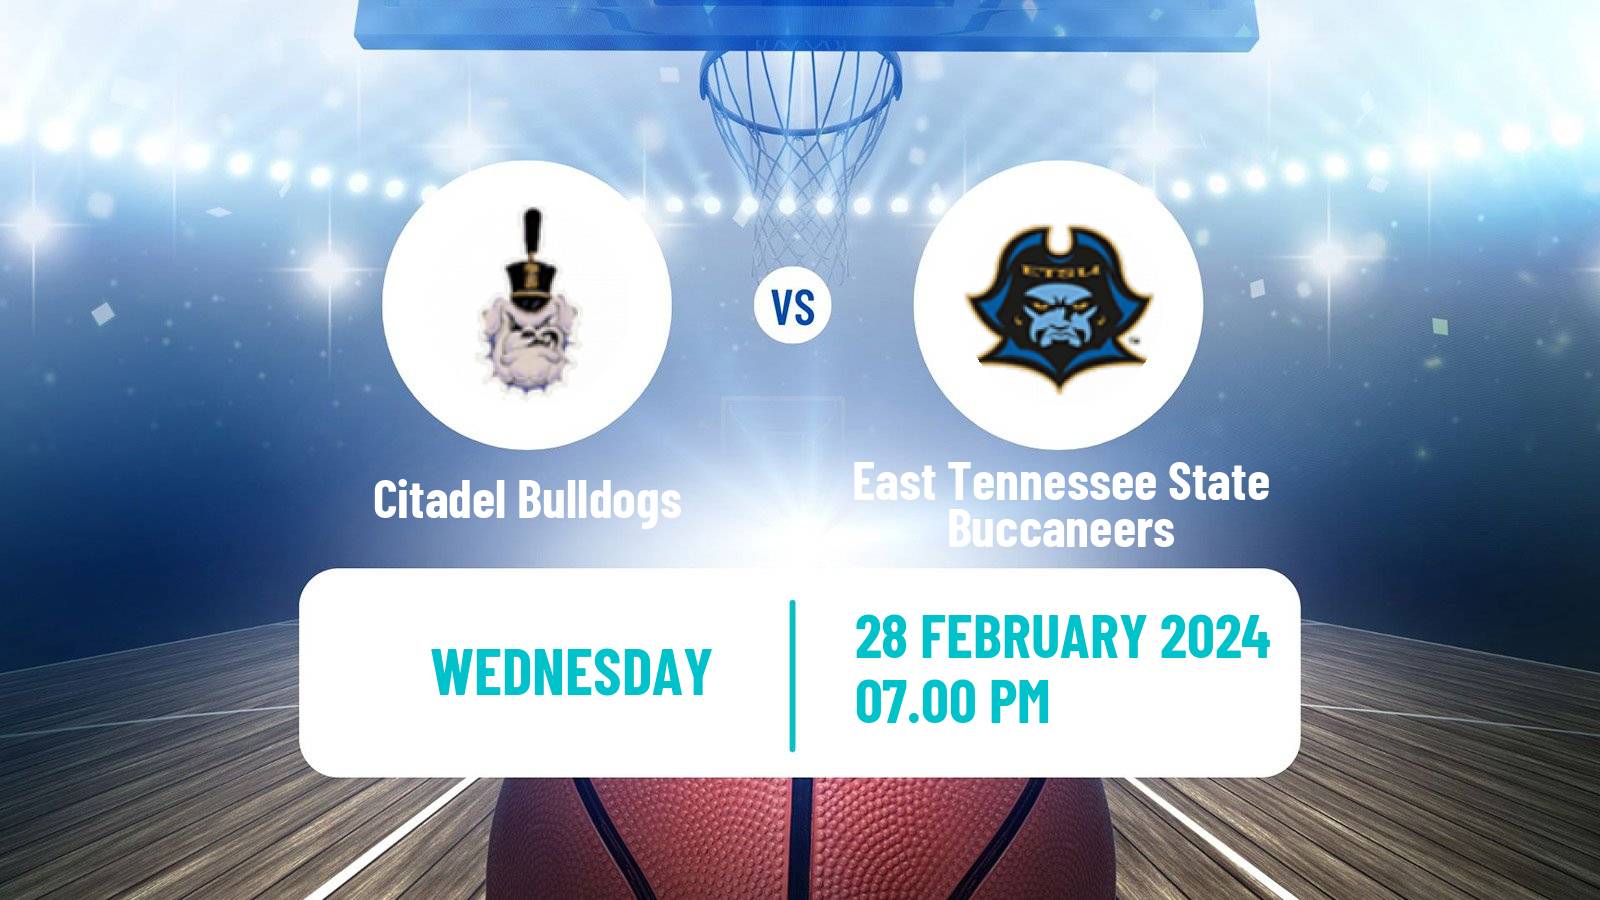 Basketball NCAA College Basketball Citadel Bulldogs - East Tennessee State Buccaneers